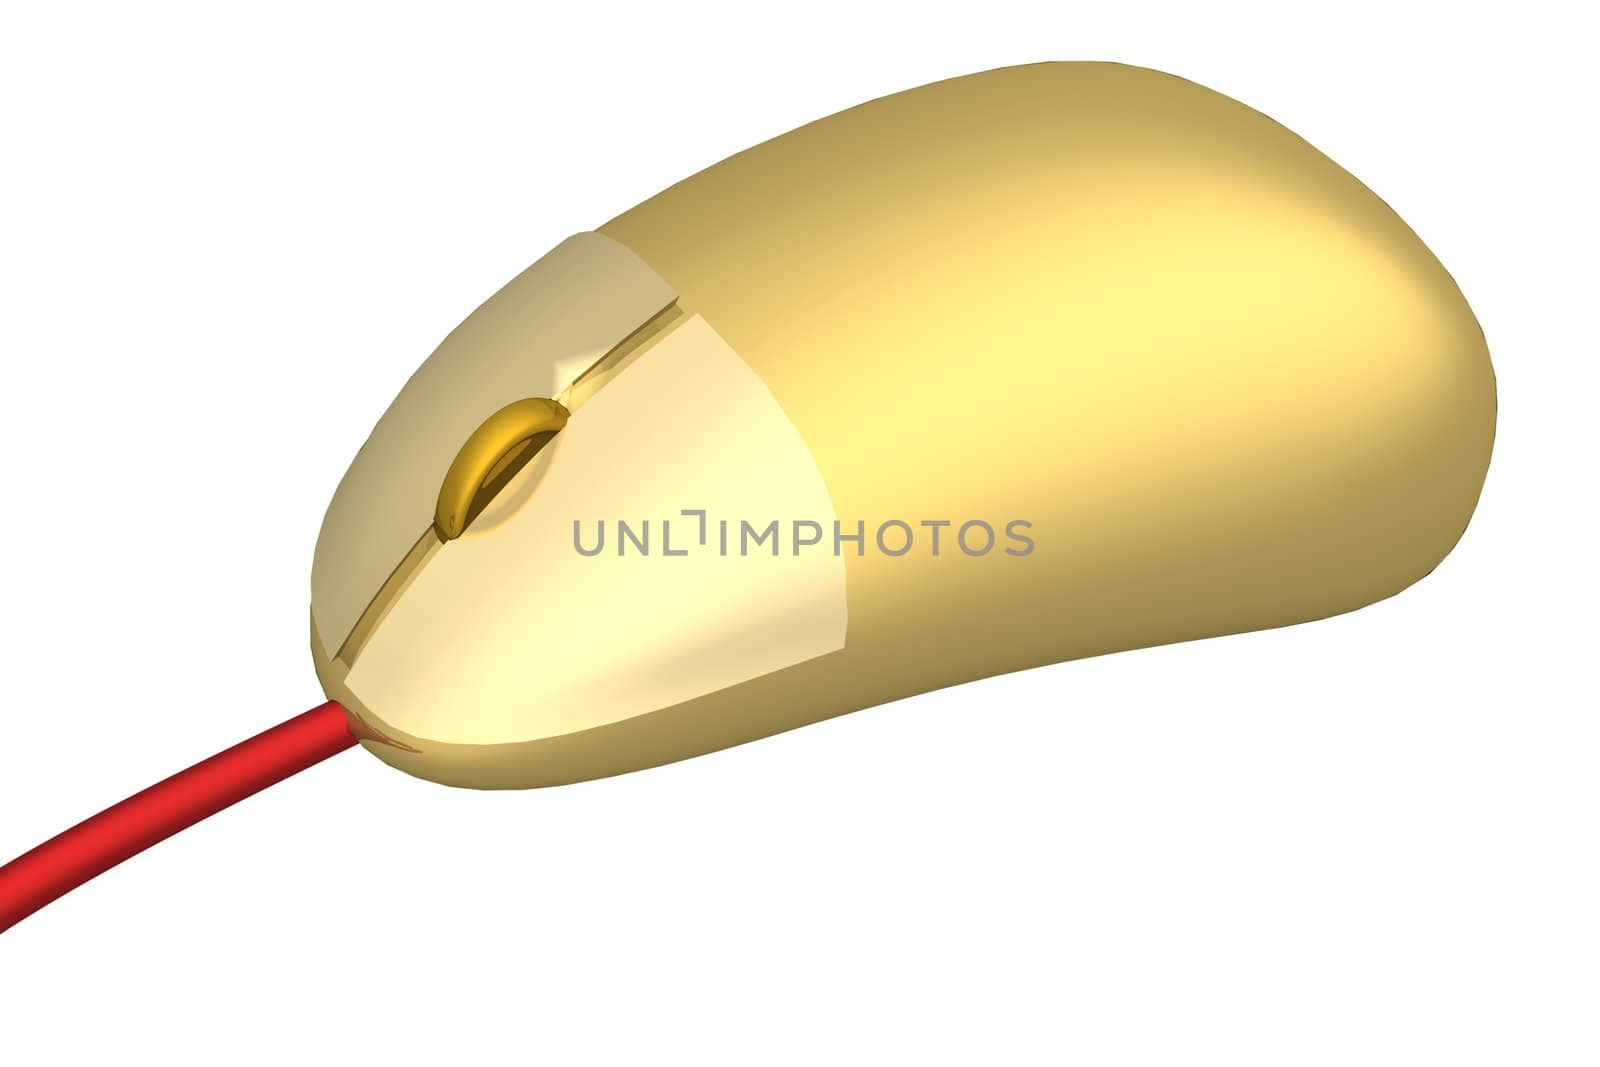 The gold computer mouse. 3D image.